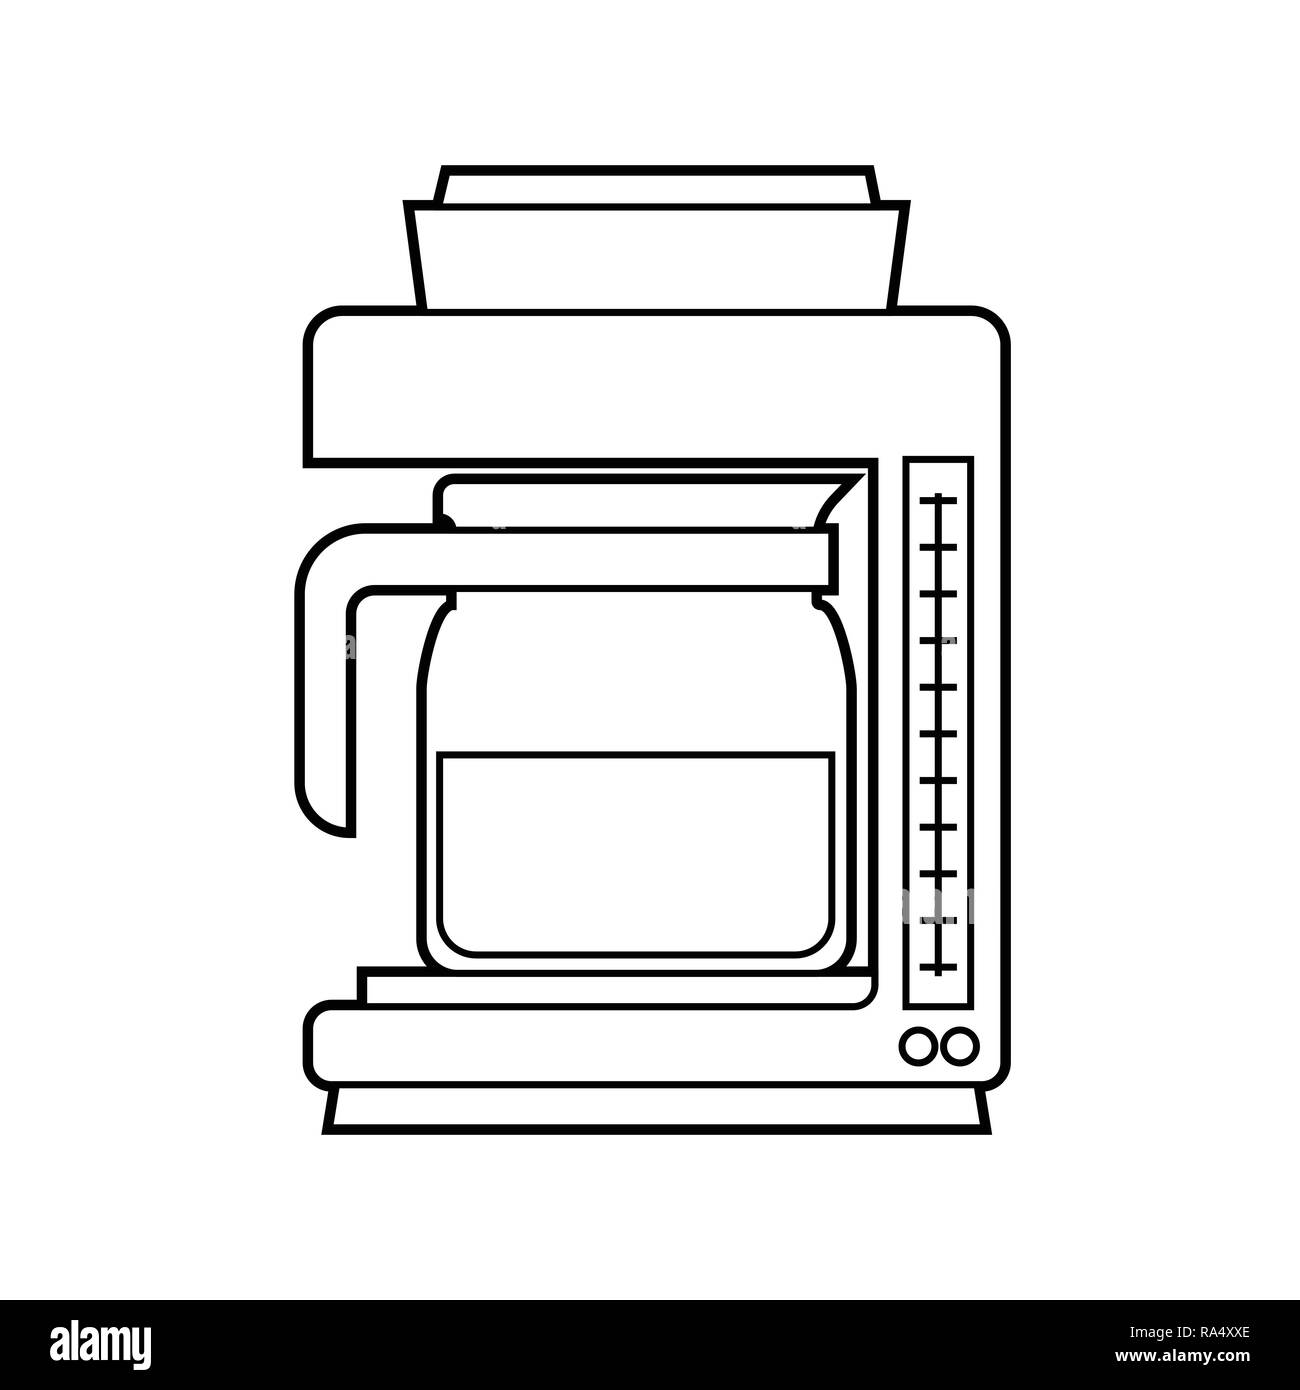 Isolated Coffee Maker on white background, Simple Line Vector Illustration Stock Vector